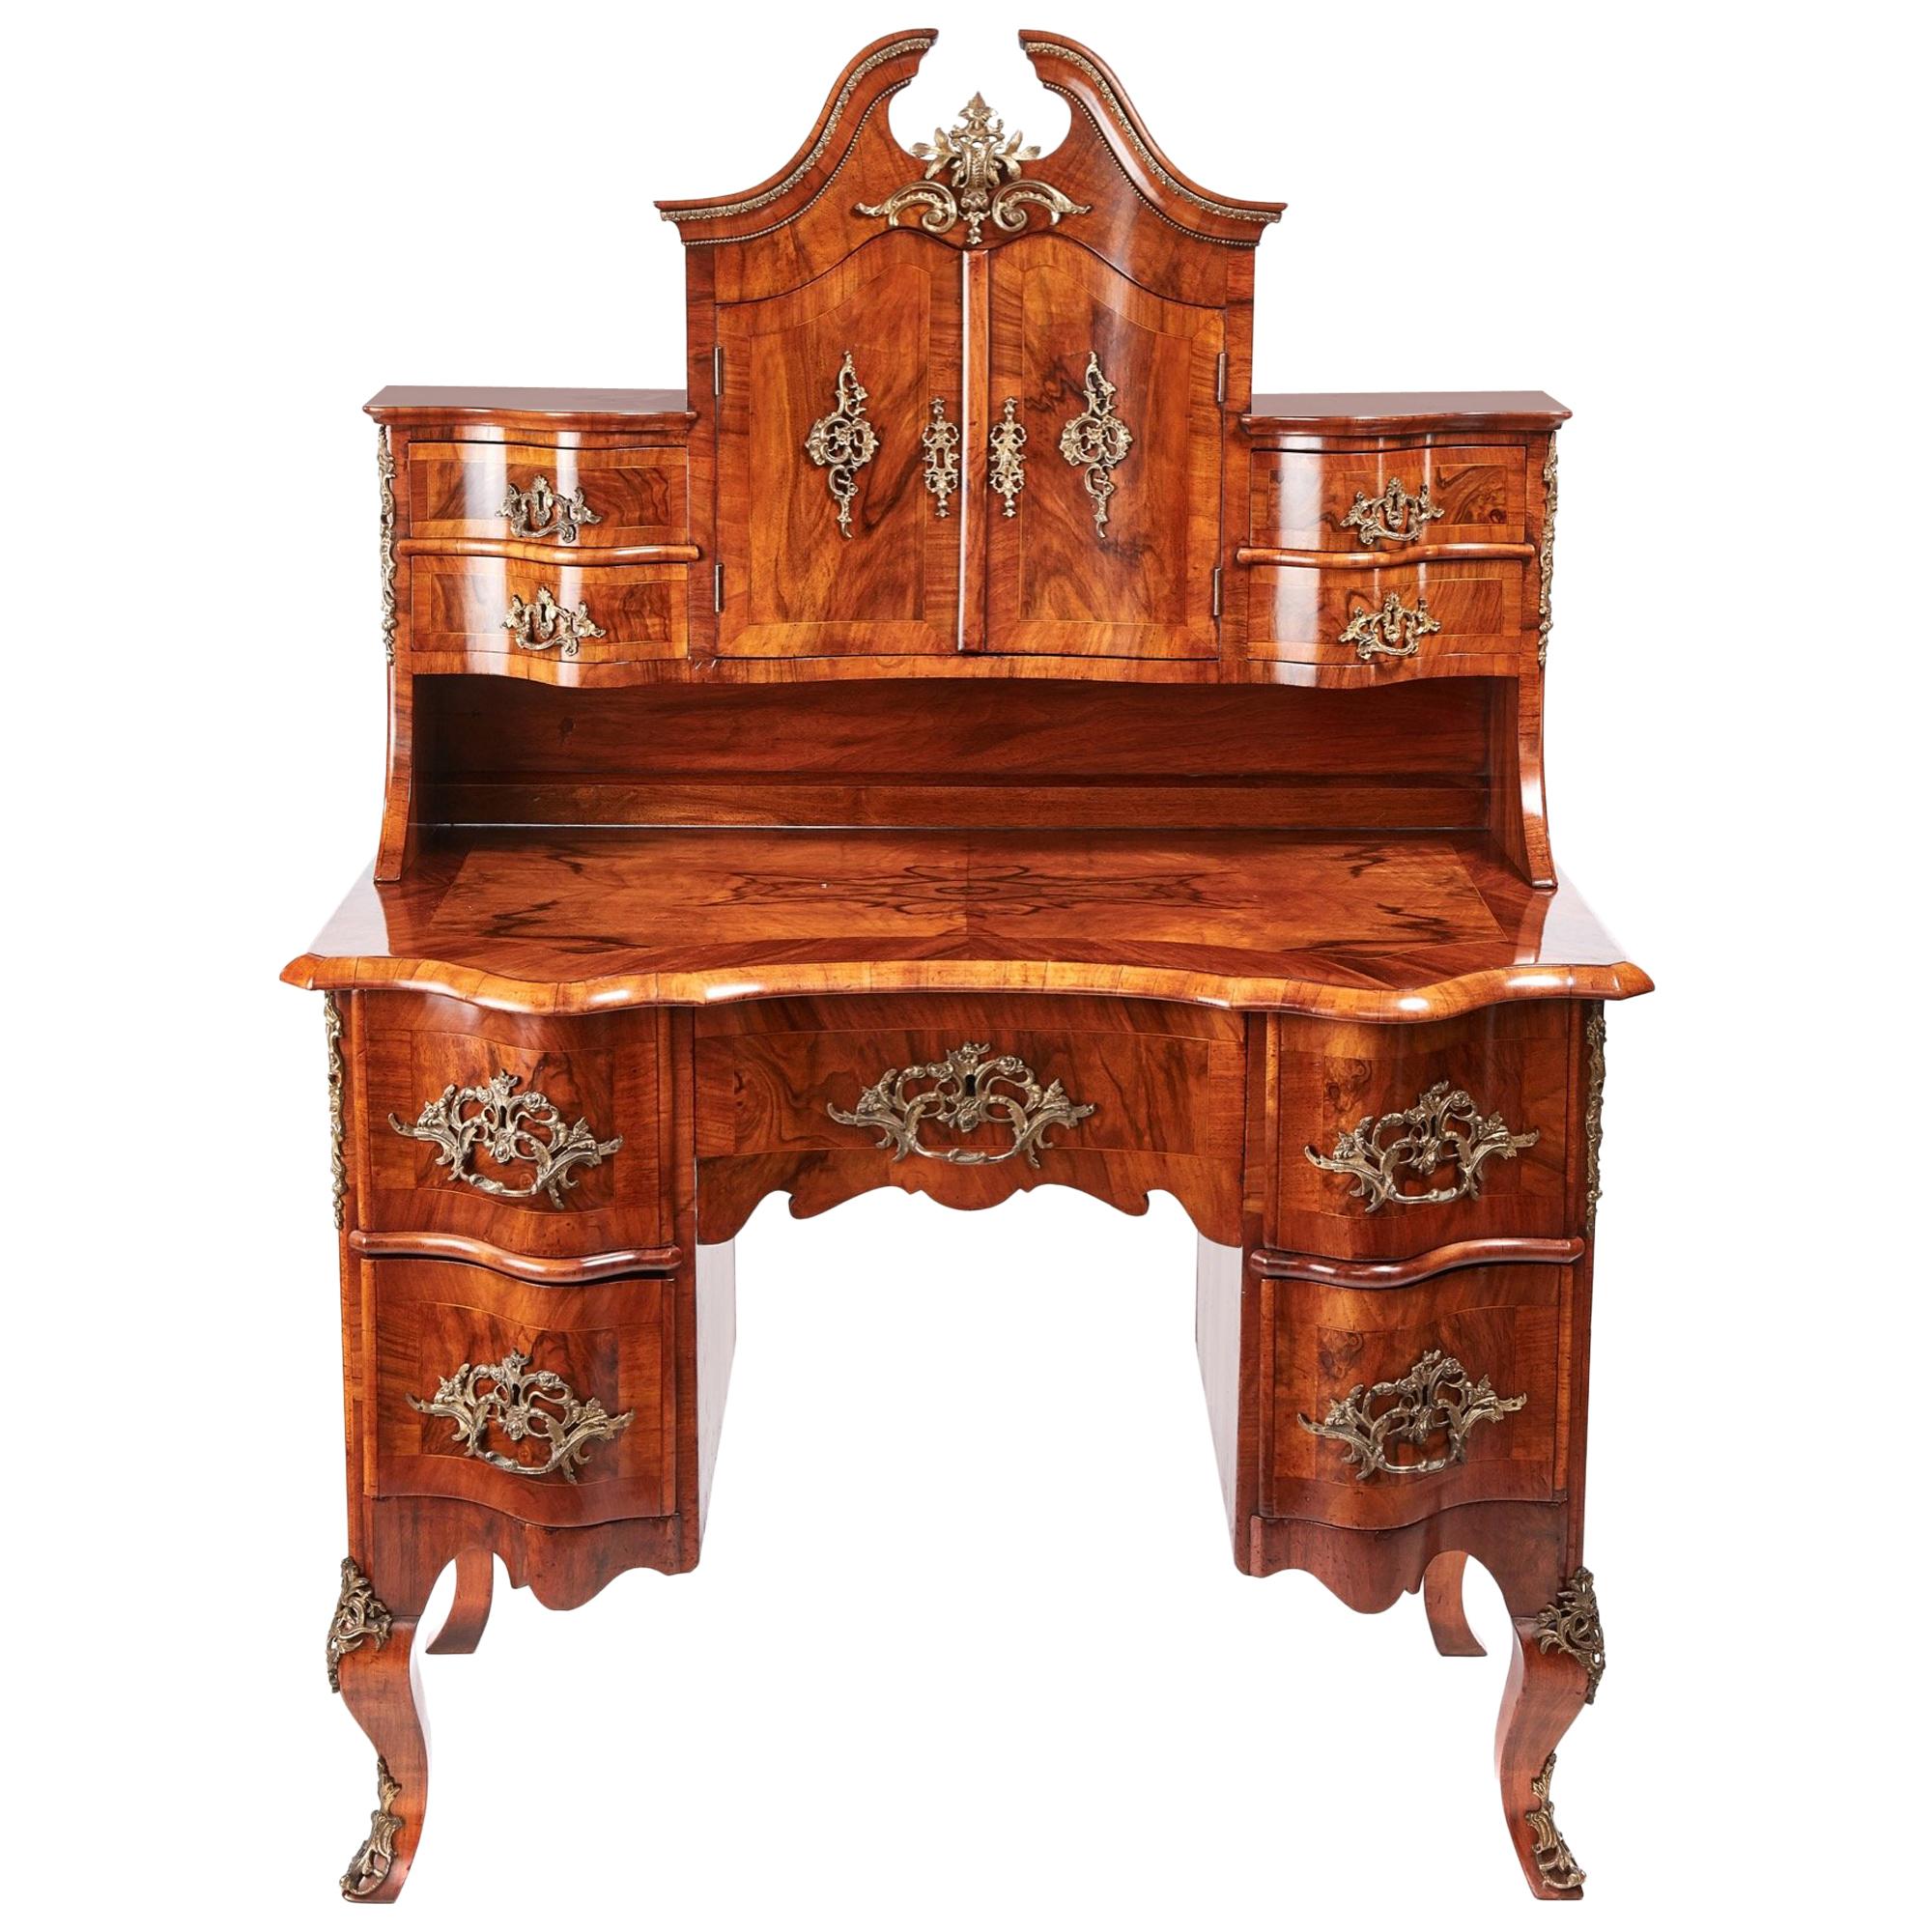 Outstanding Quality Victorian French Burr Walnut Desk For Sale